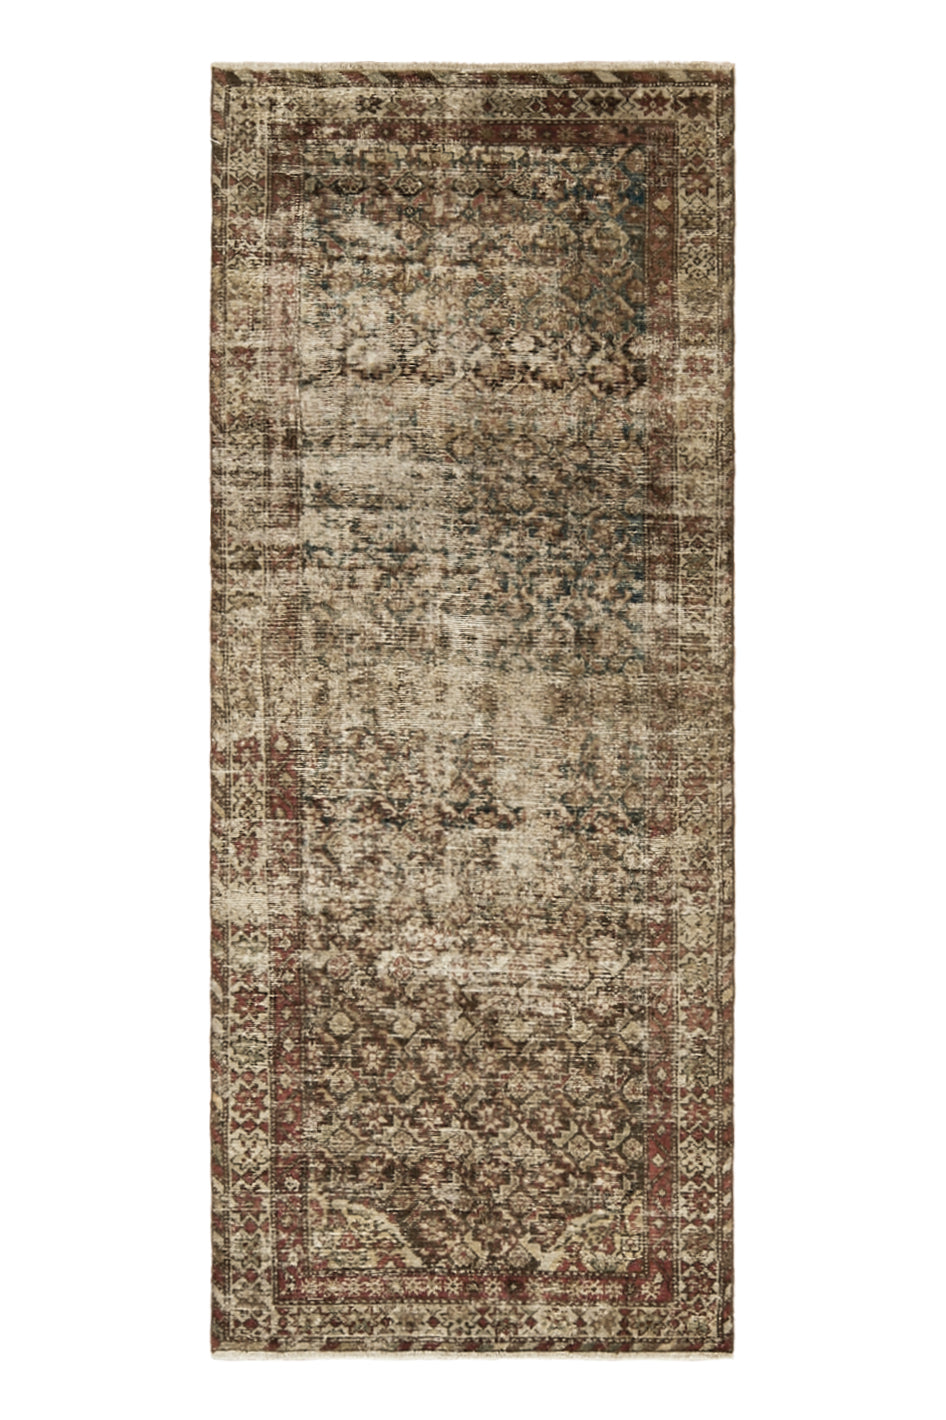 Claireen - Vintage Persian Rug Runner